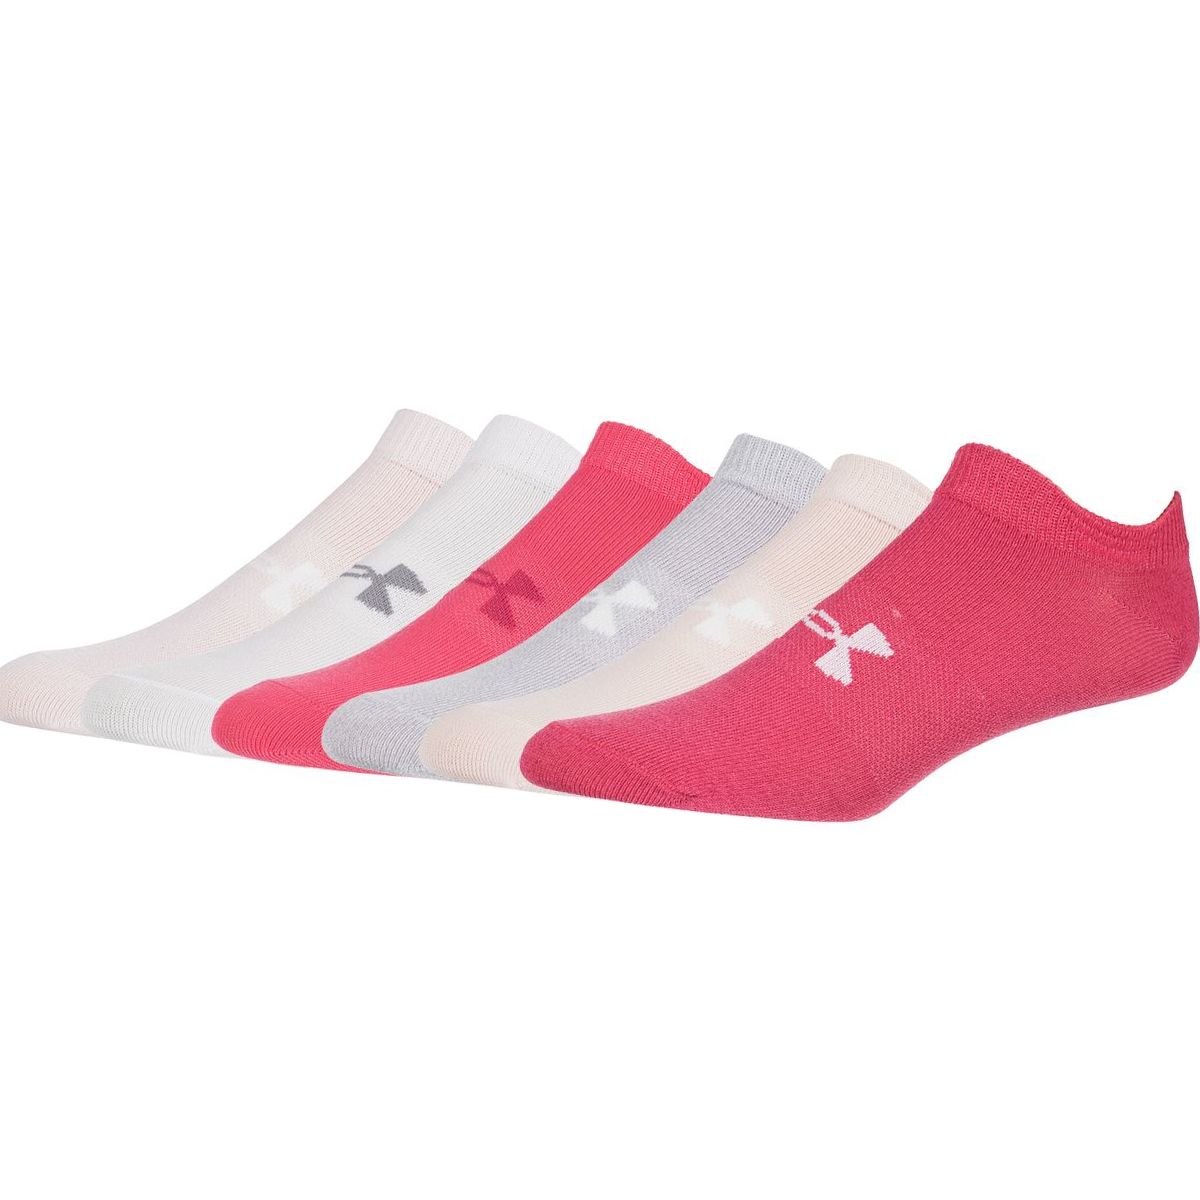 Under Armour Essential No-Show 2.0 Sock - 6-Pack - Women's